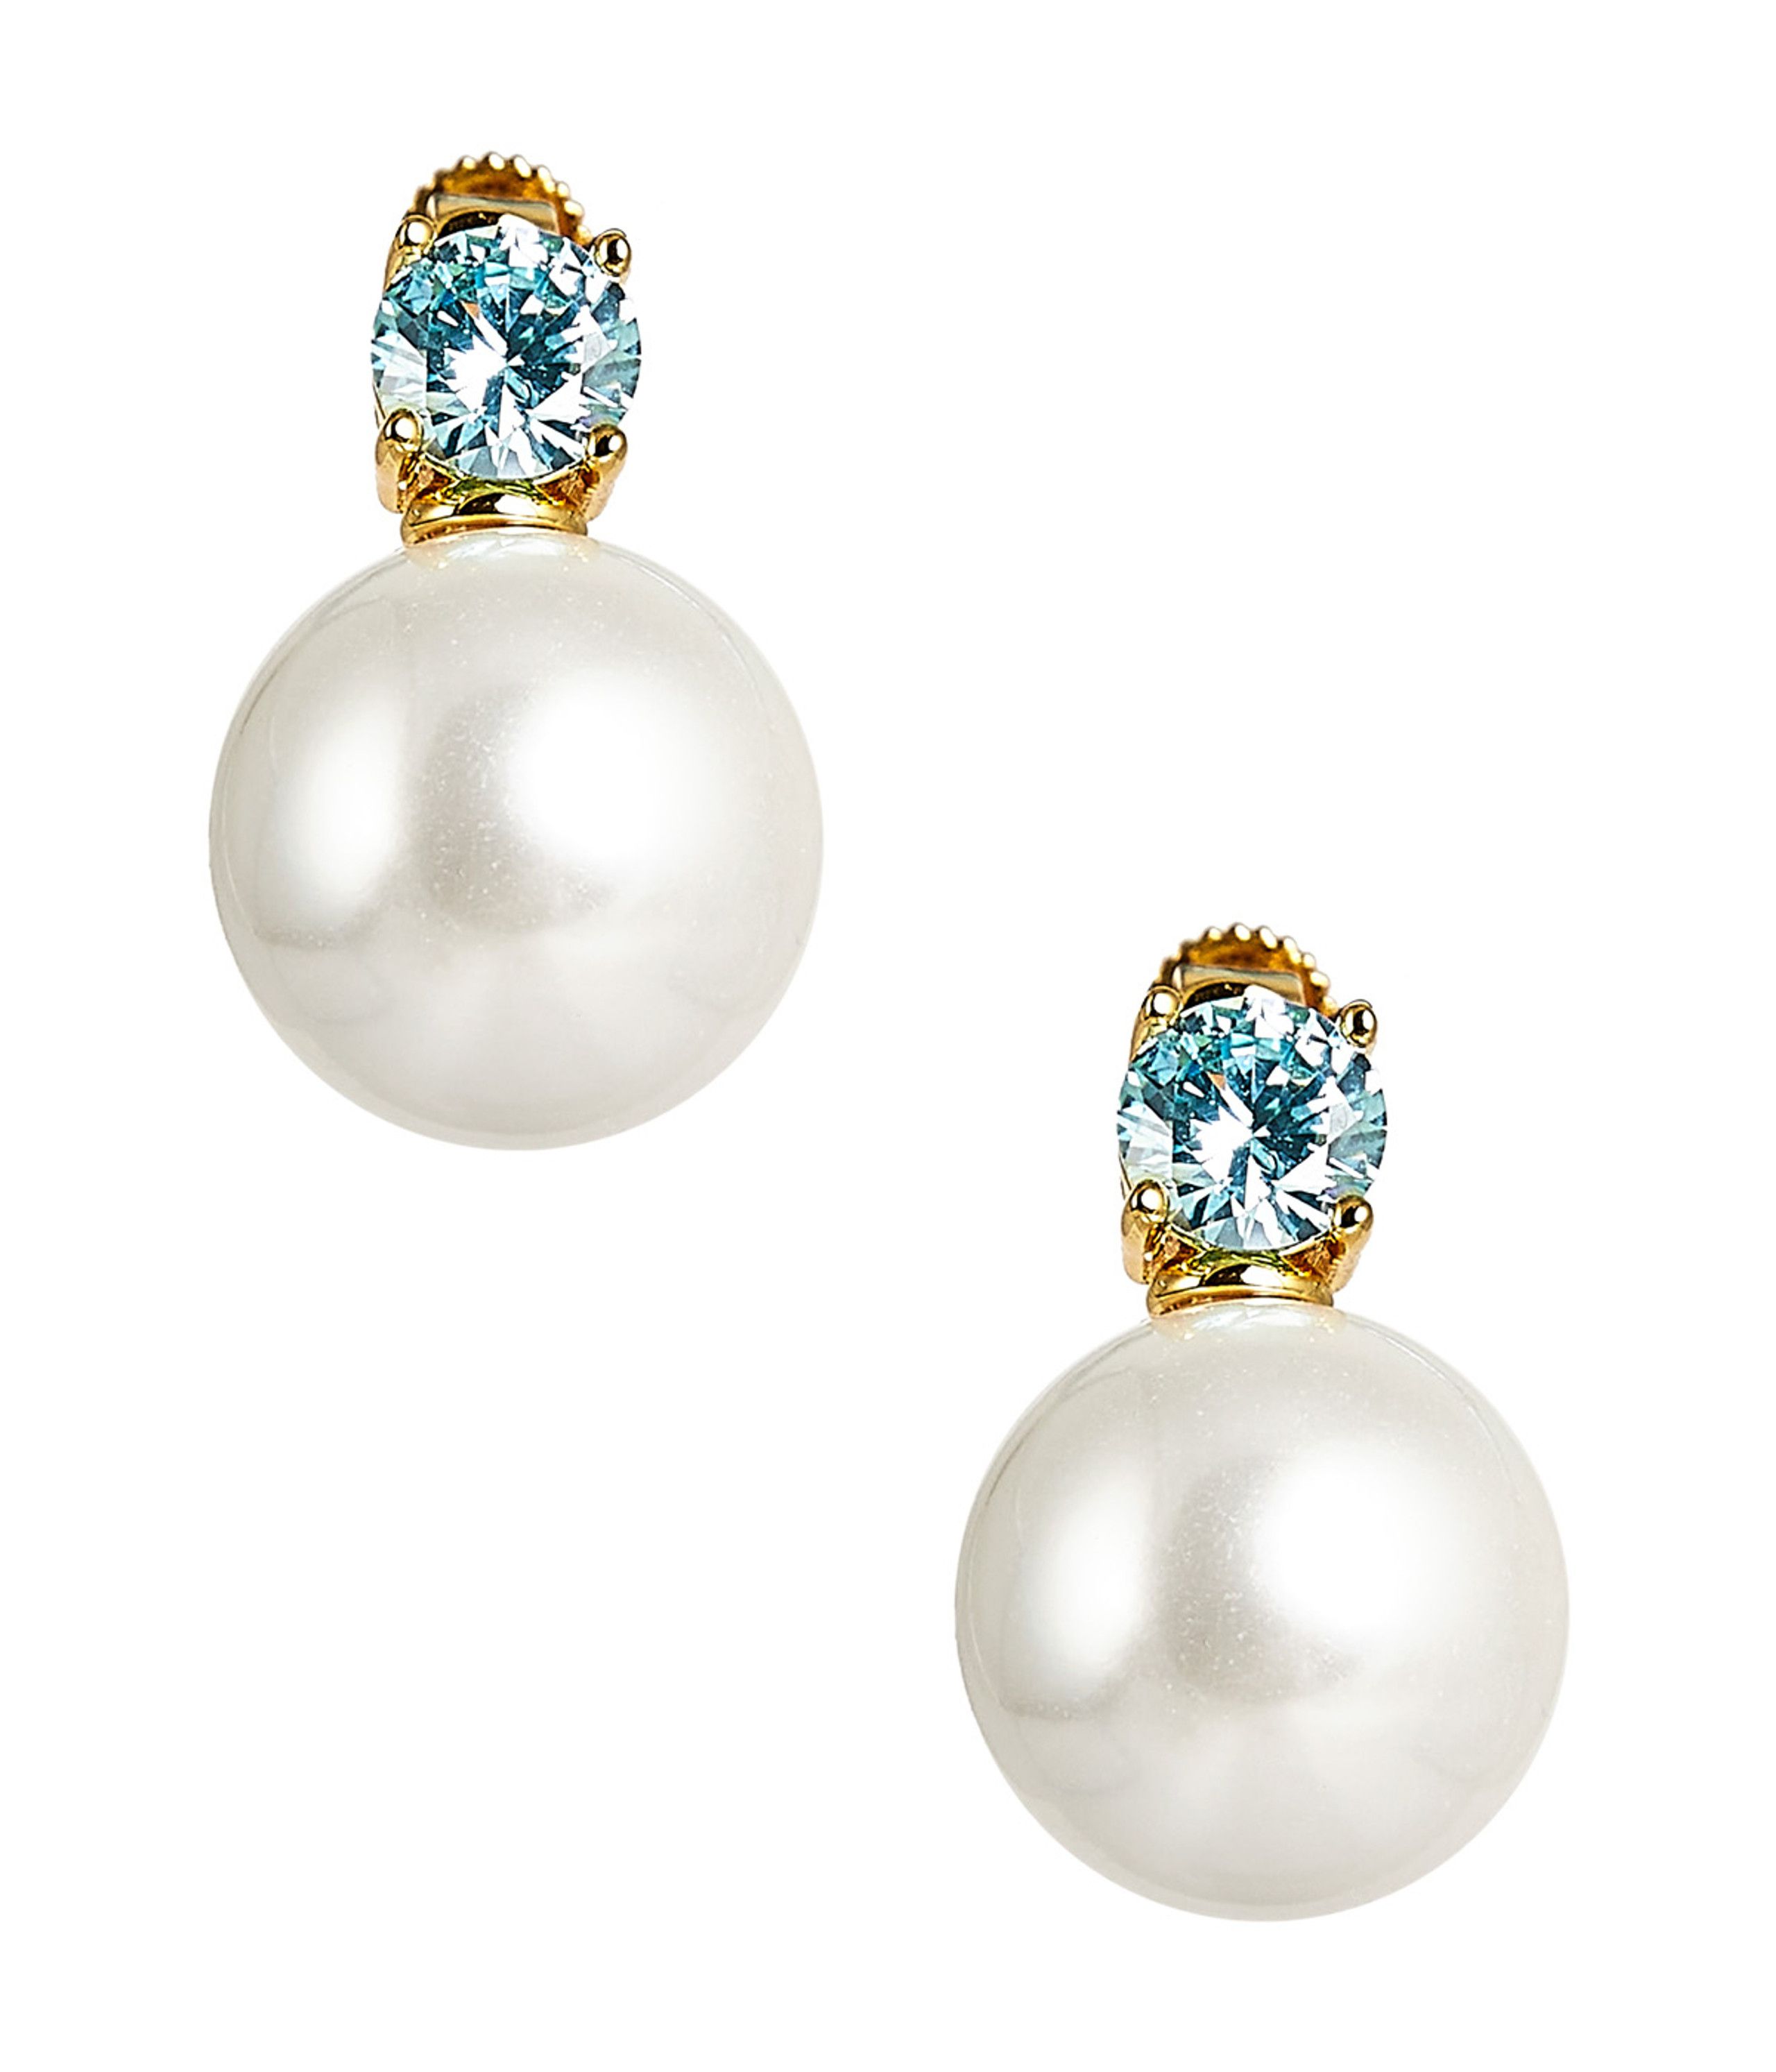 Carolyn - Blue Stone - Big Stone and Pearl Stud - Belle of the Ball | Lisi Lerch Inc